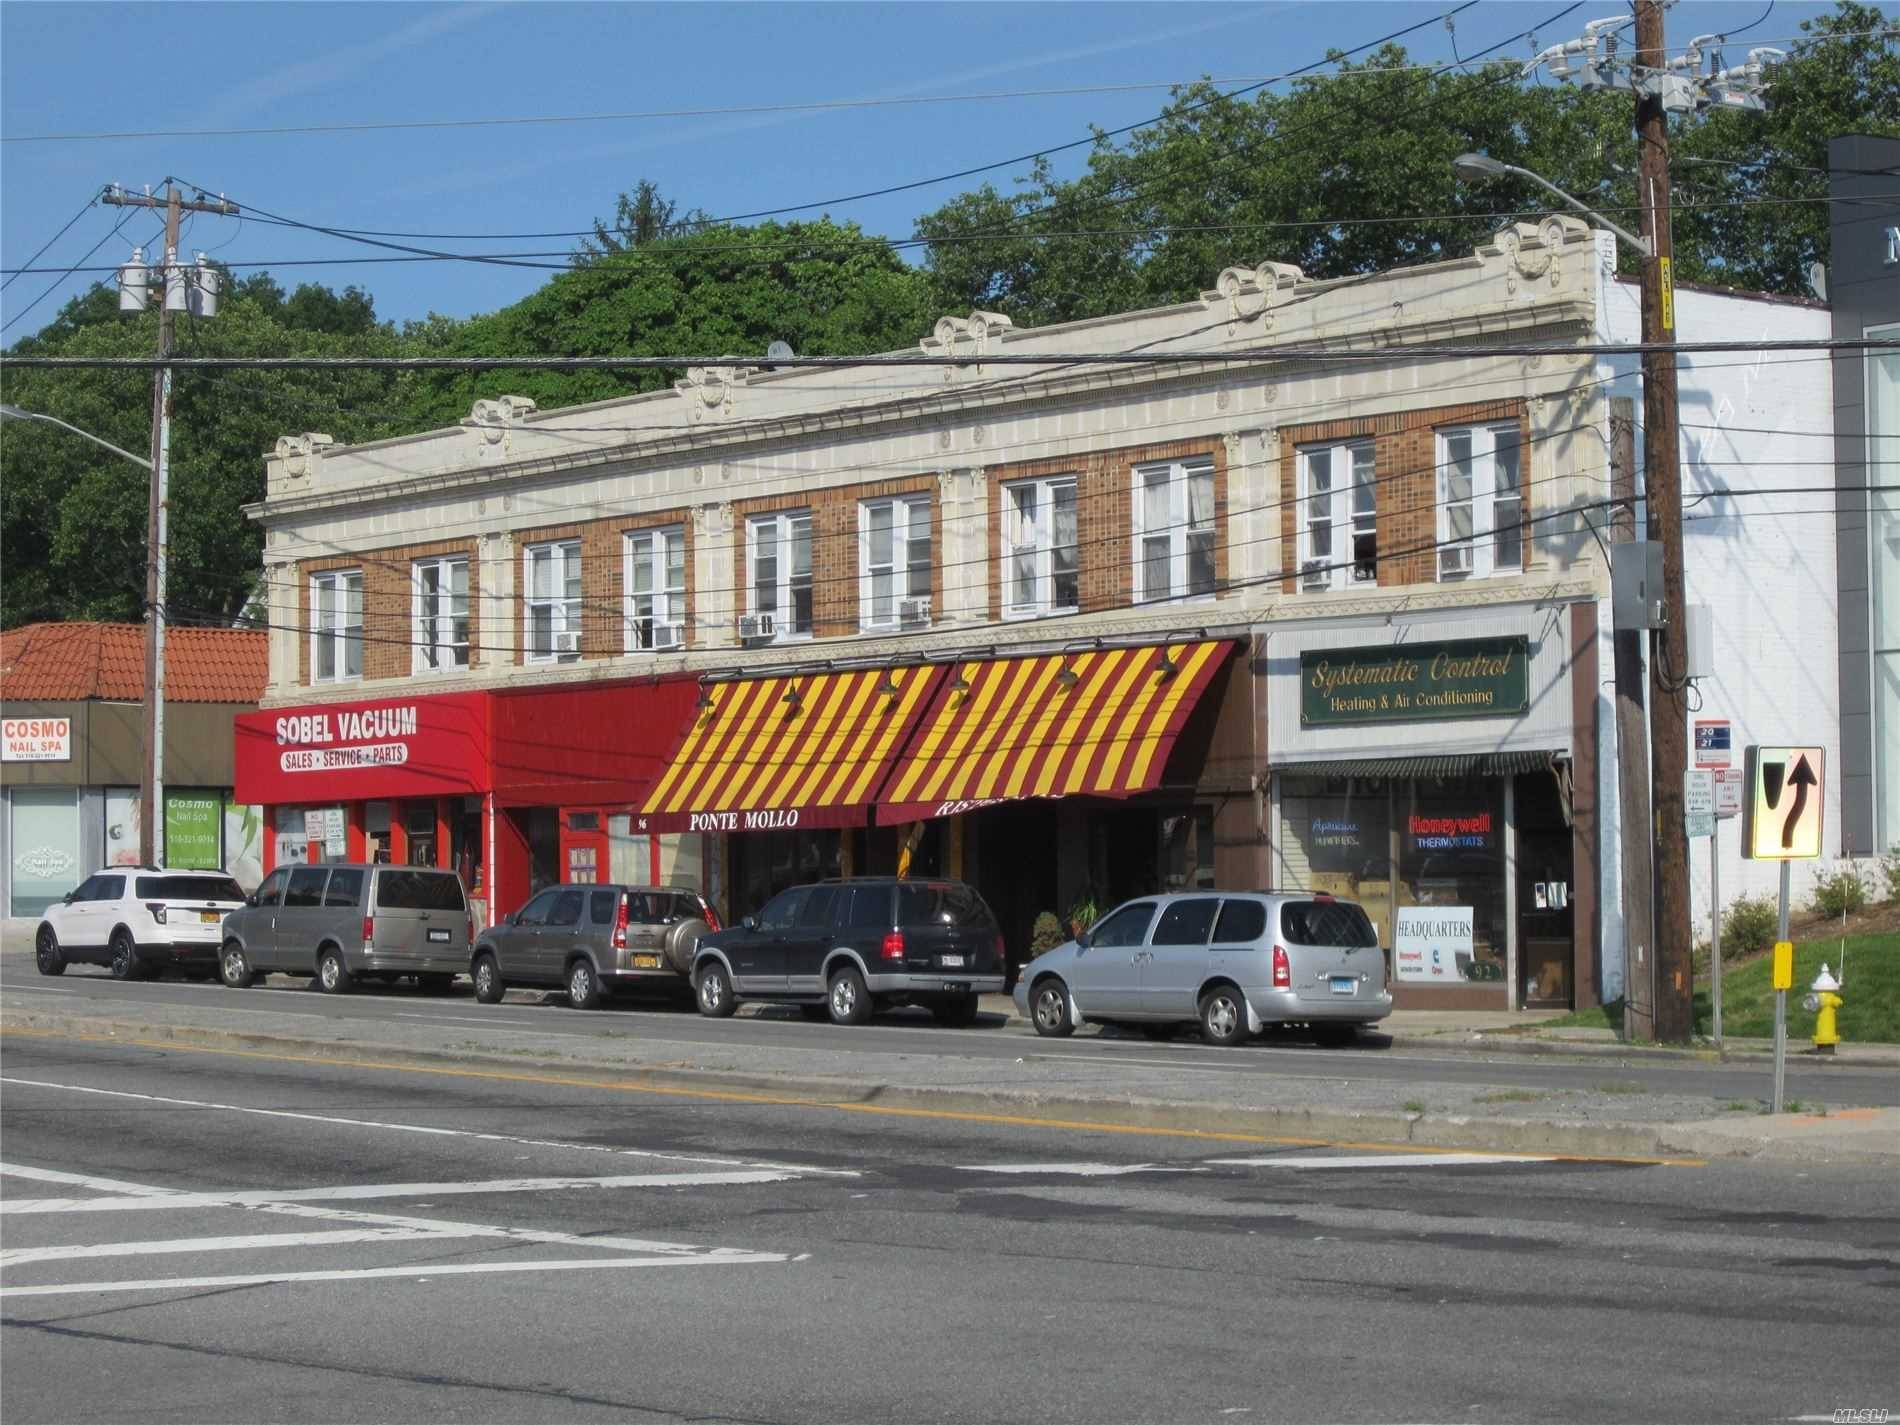 1500 sq ft Storefront for lease at one of the busiest intersections on the North Shore of Long Island on Northern Blvd.